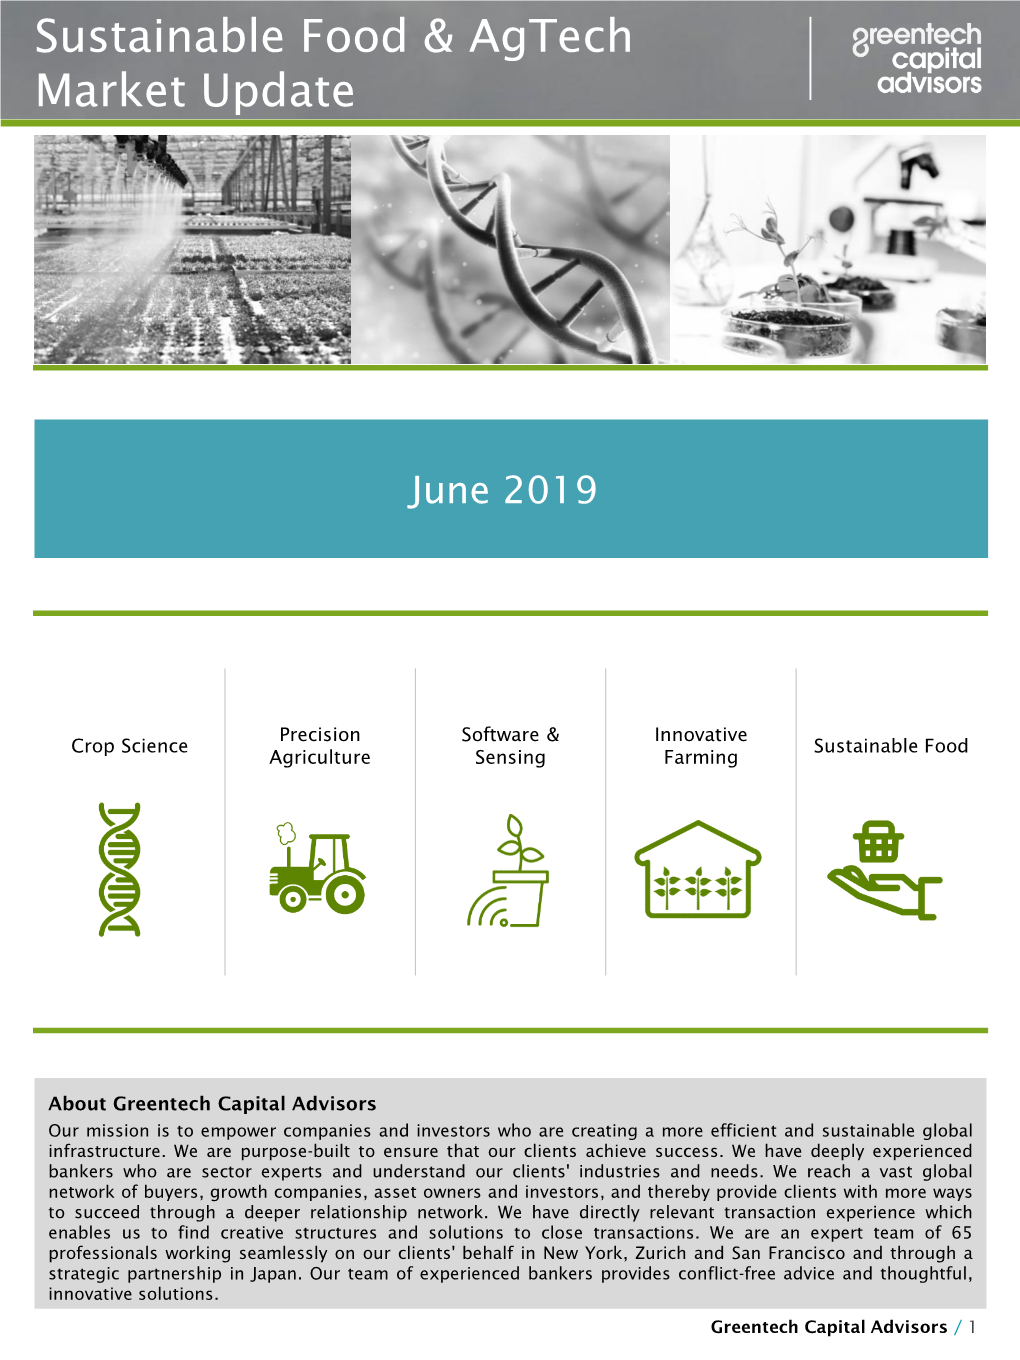 June 2019 Sustainable Food & Agtech